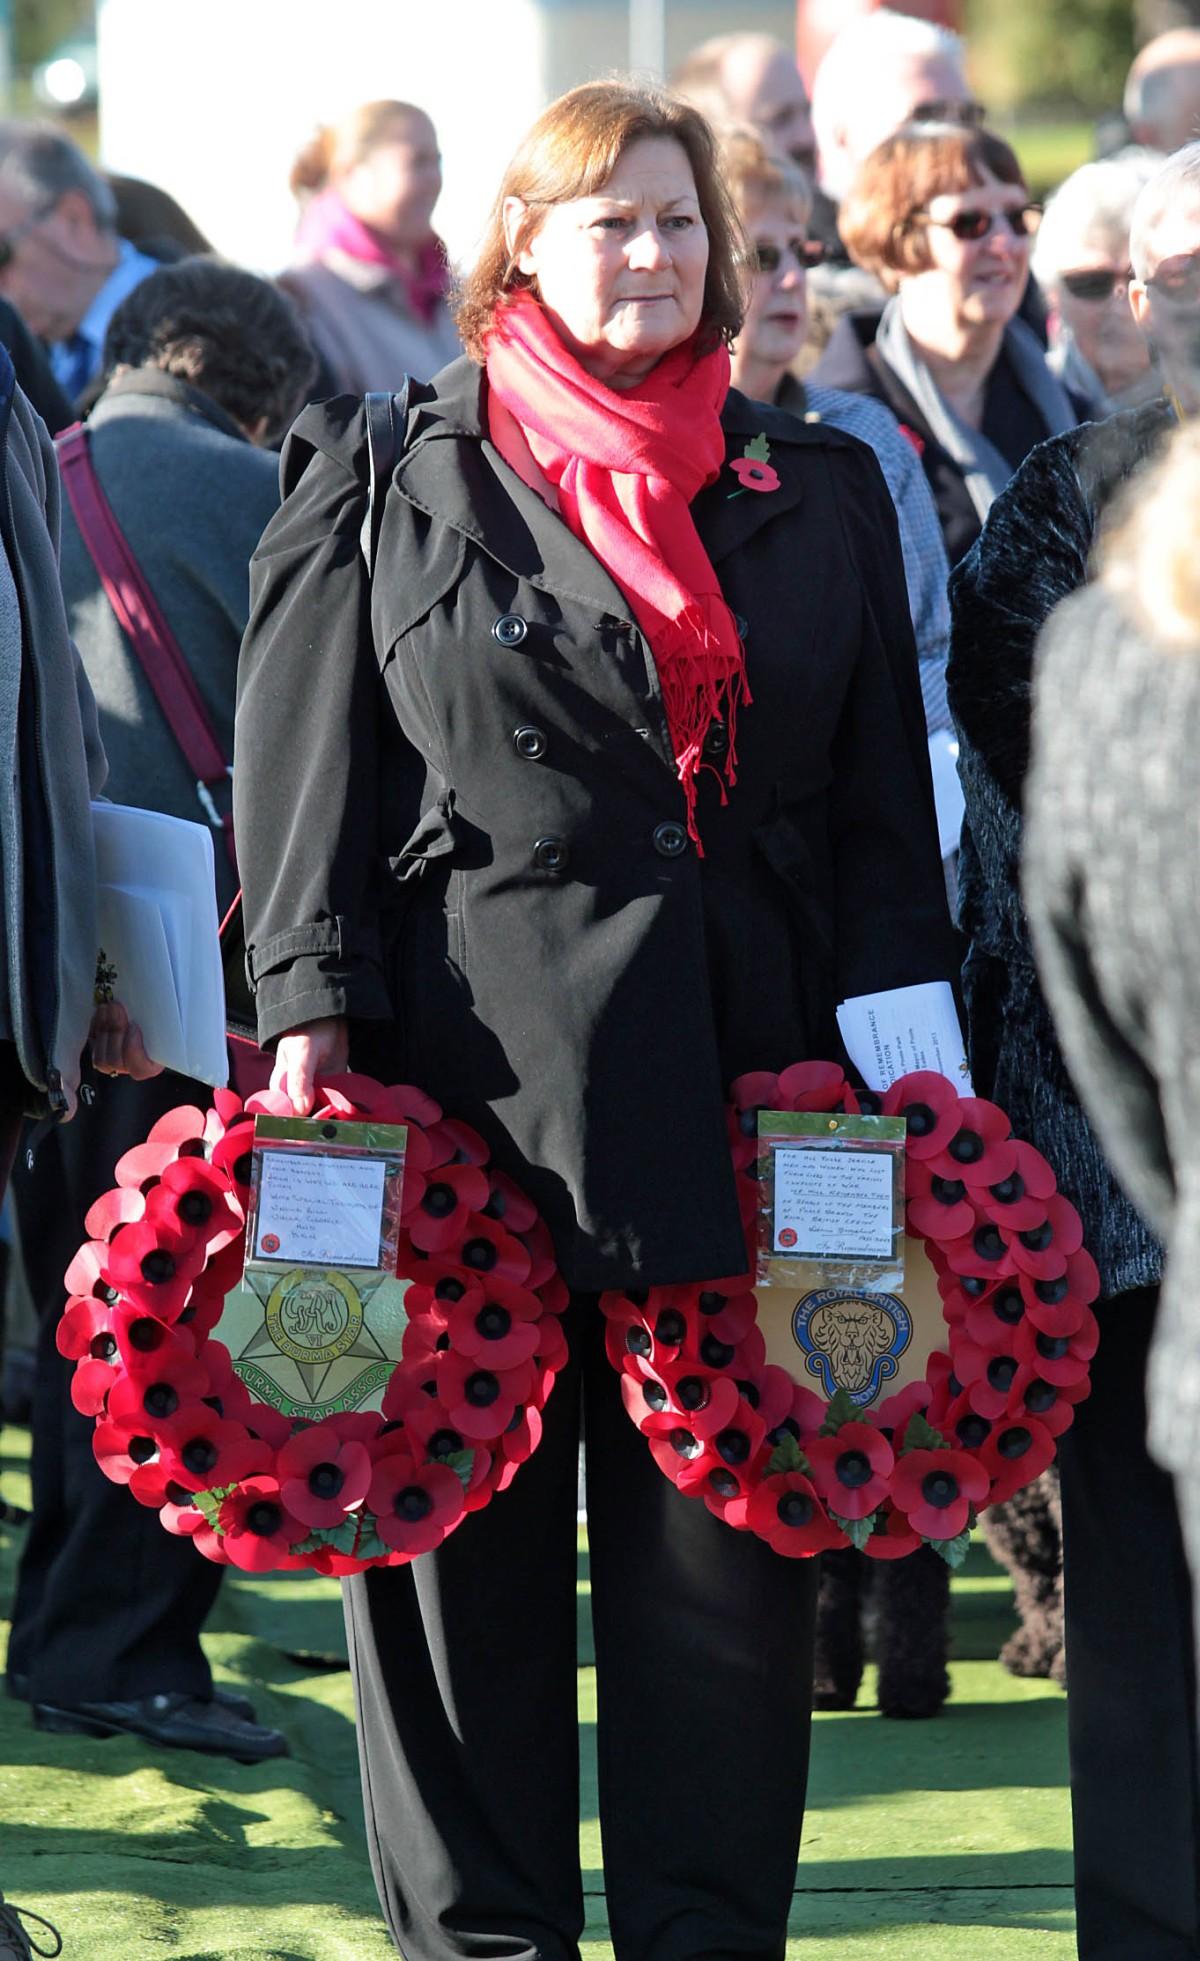 All our pictures of the Remembrance Day service at Poole Park